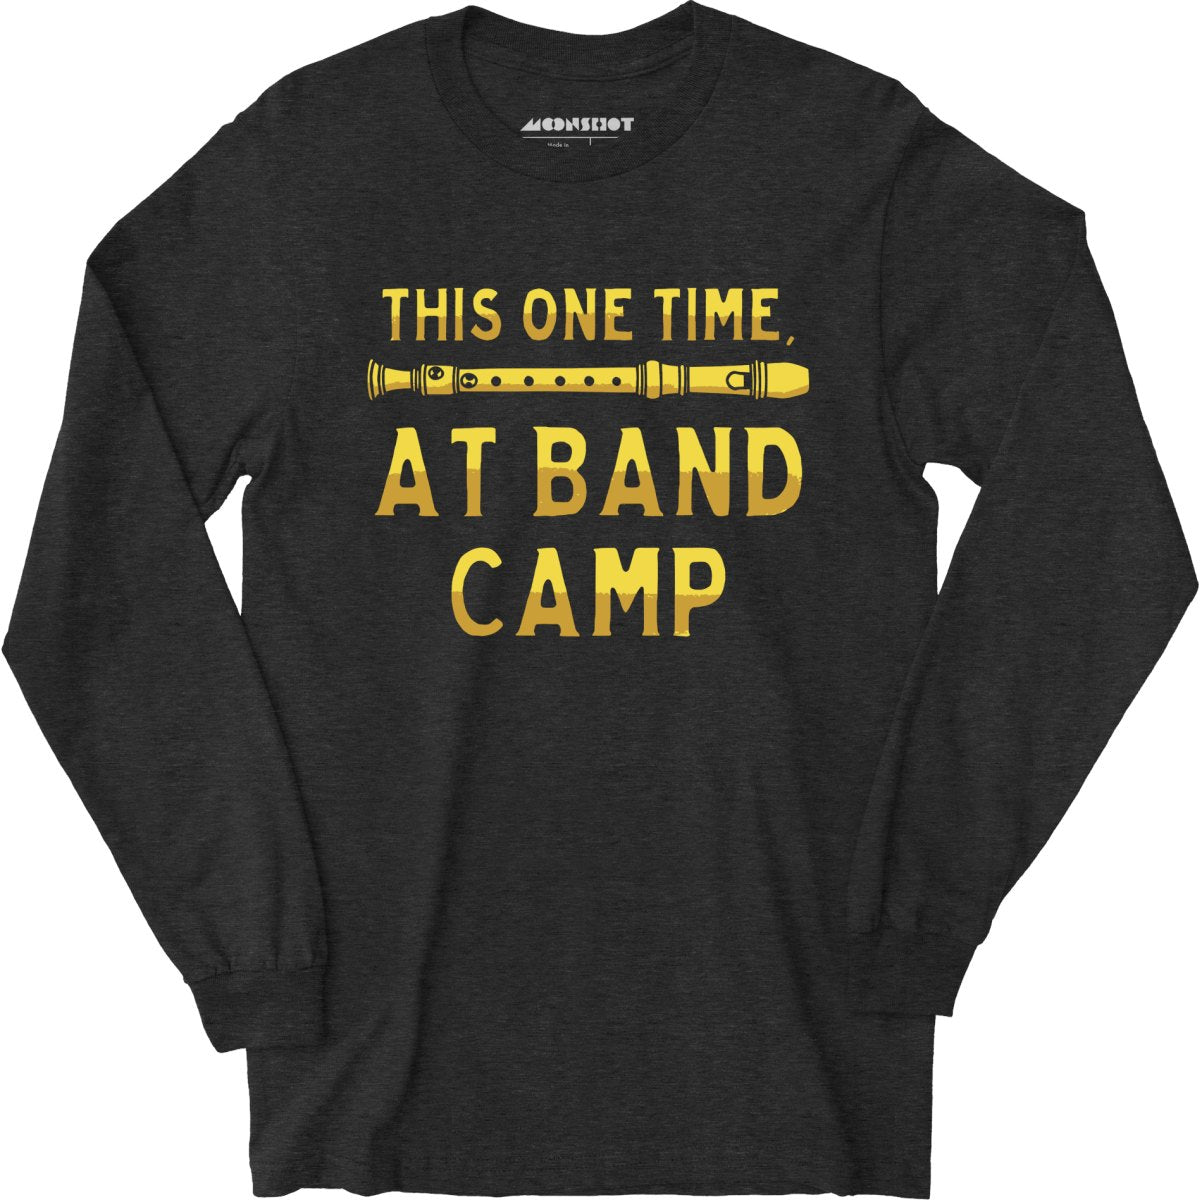 This One Time, at Band Camp - Long Sleeve T-Shirt